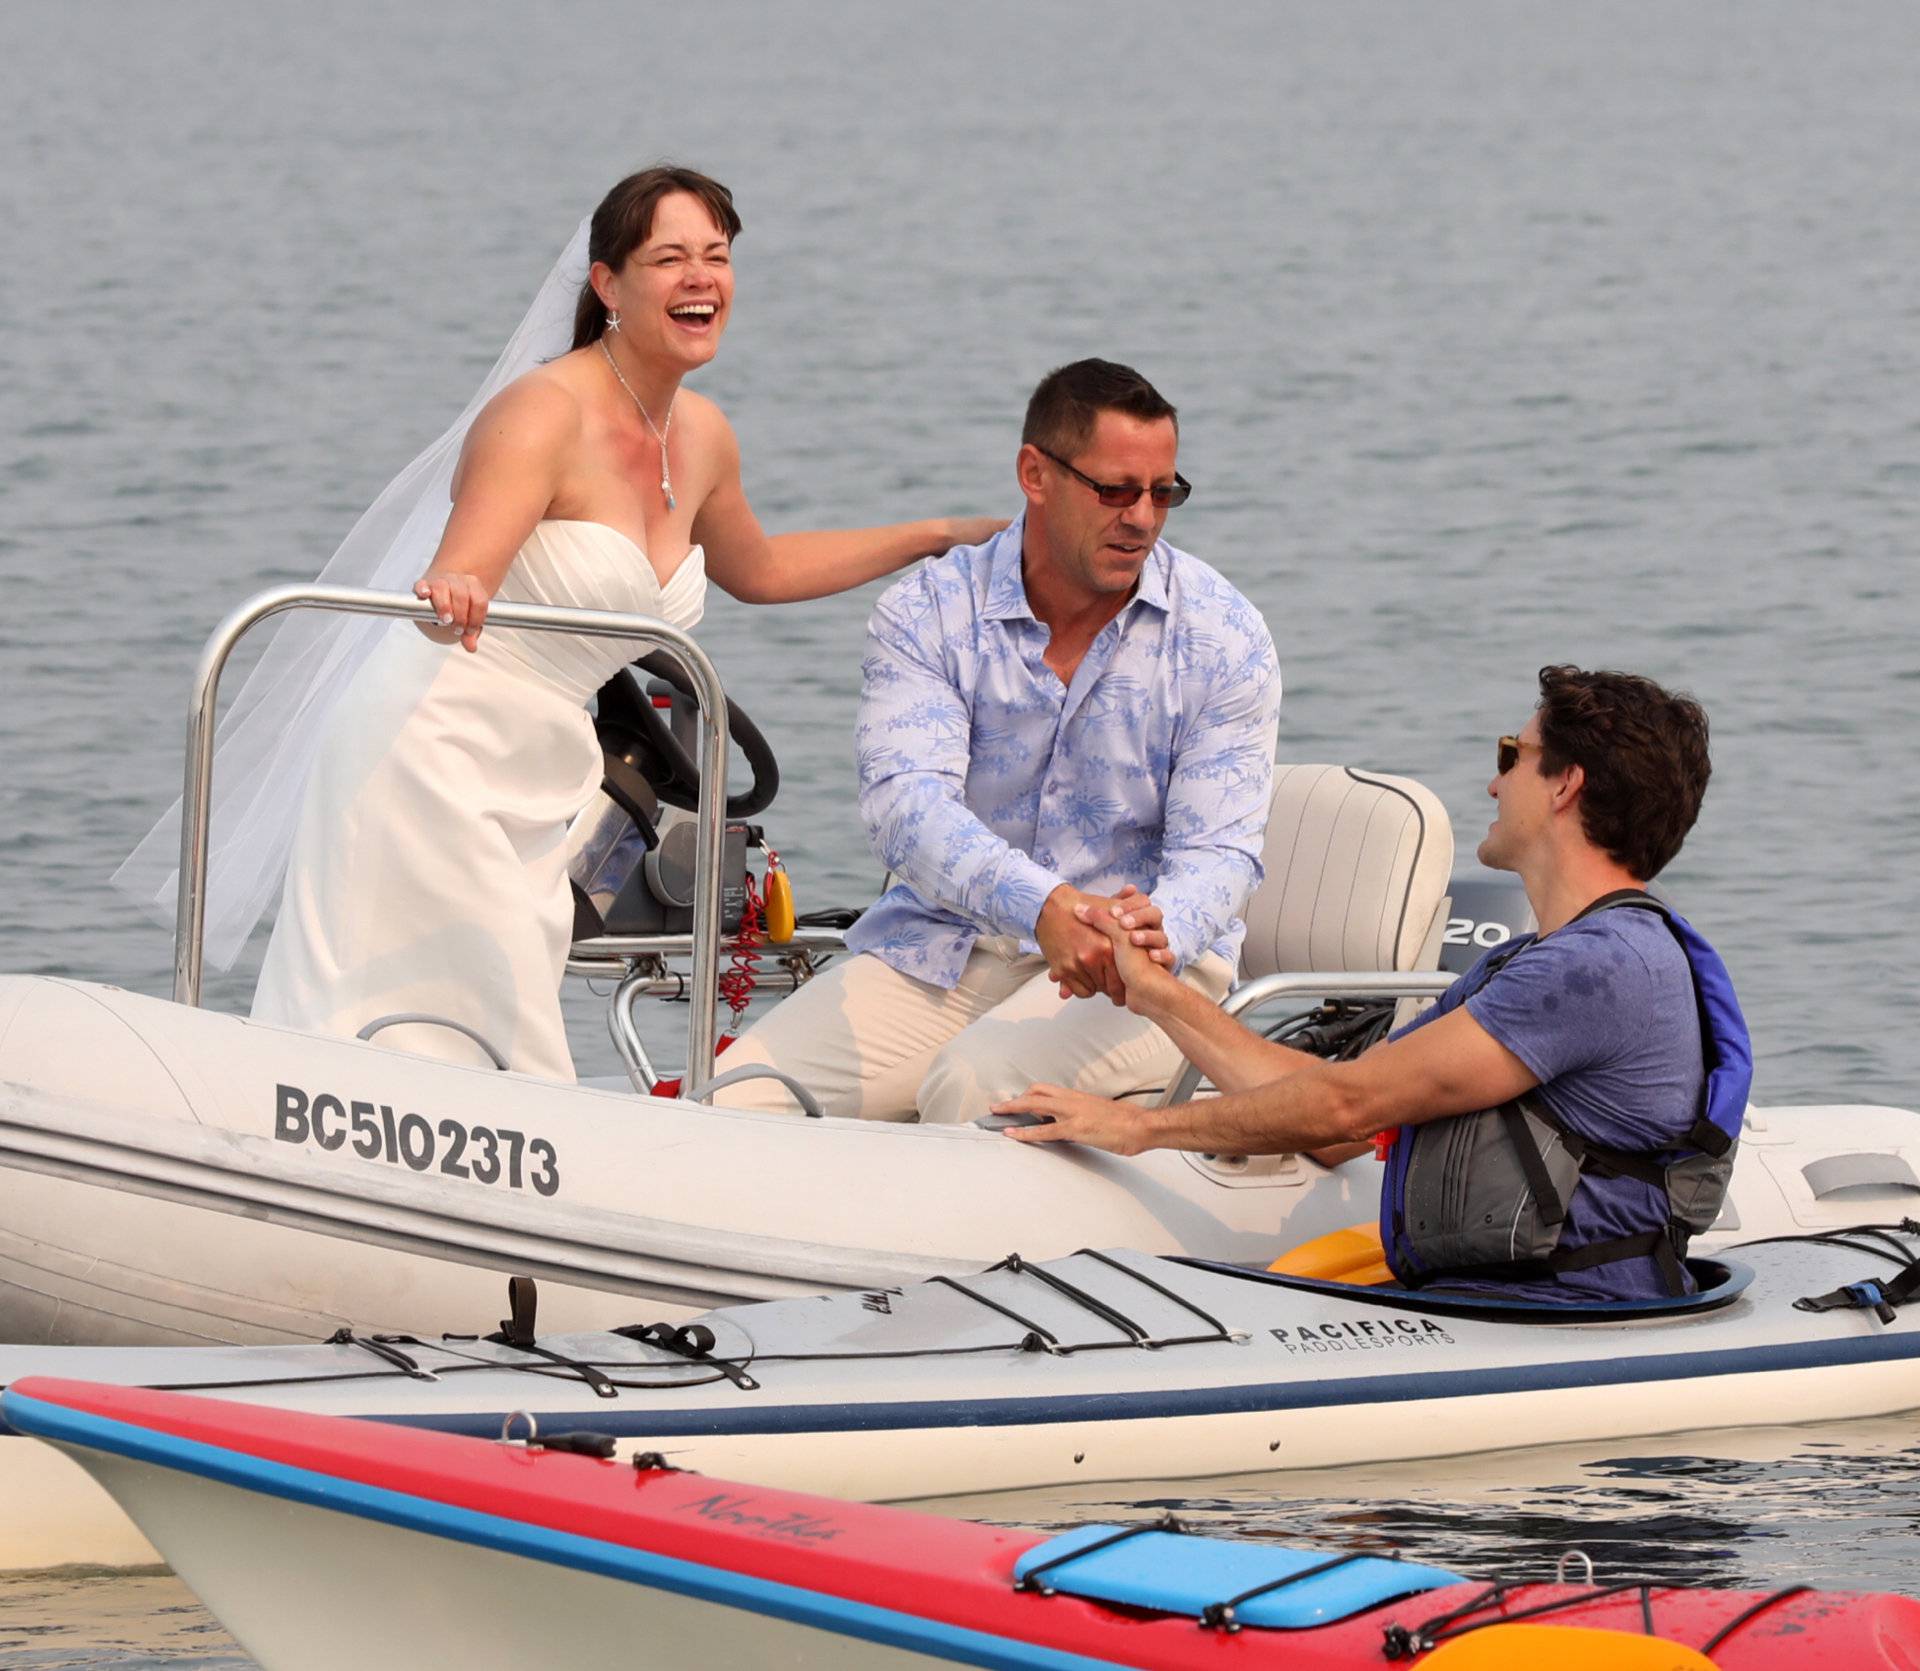 Newlyweds Michelle and Heiner Gruetzner approach Canada's Prime Minister Justin Trudeau while he was kayaking off Sidney